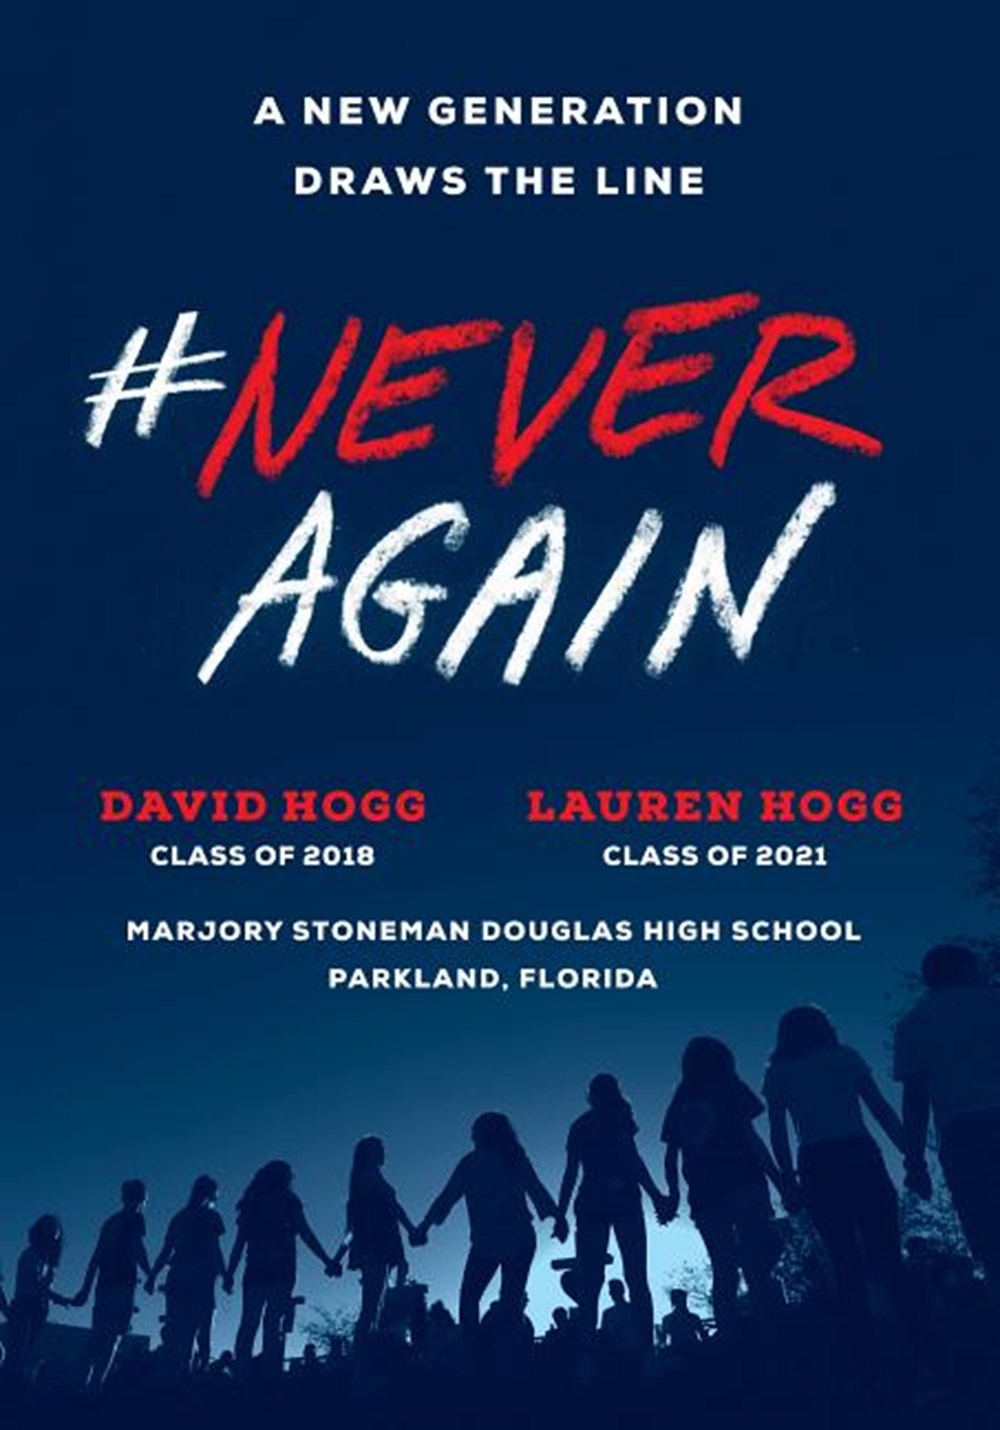 #neveragain: A New Generation Draws the Line